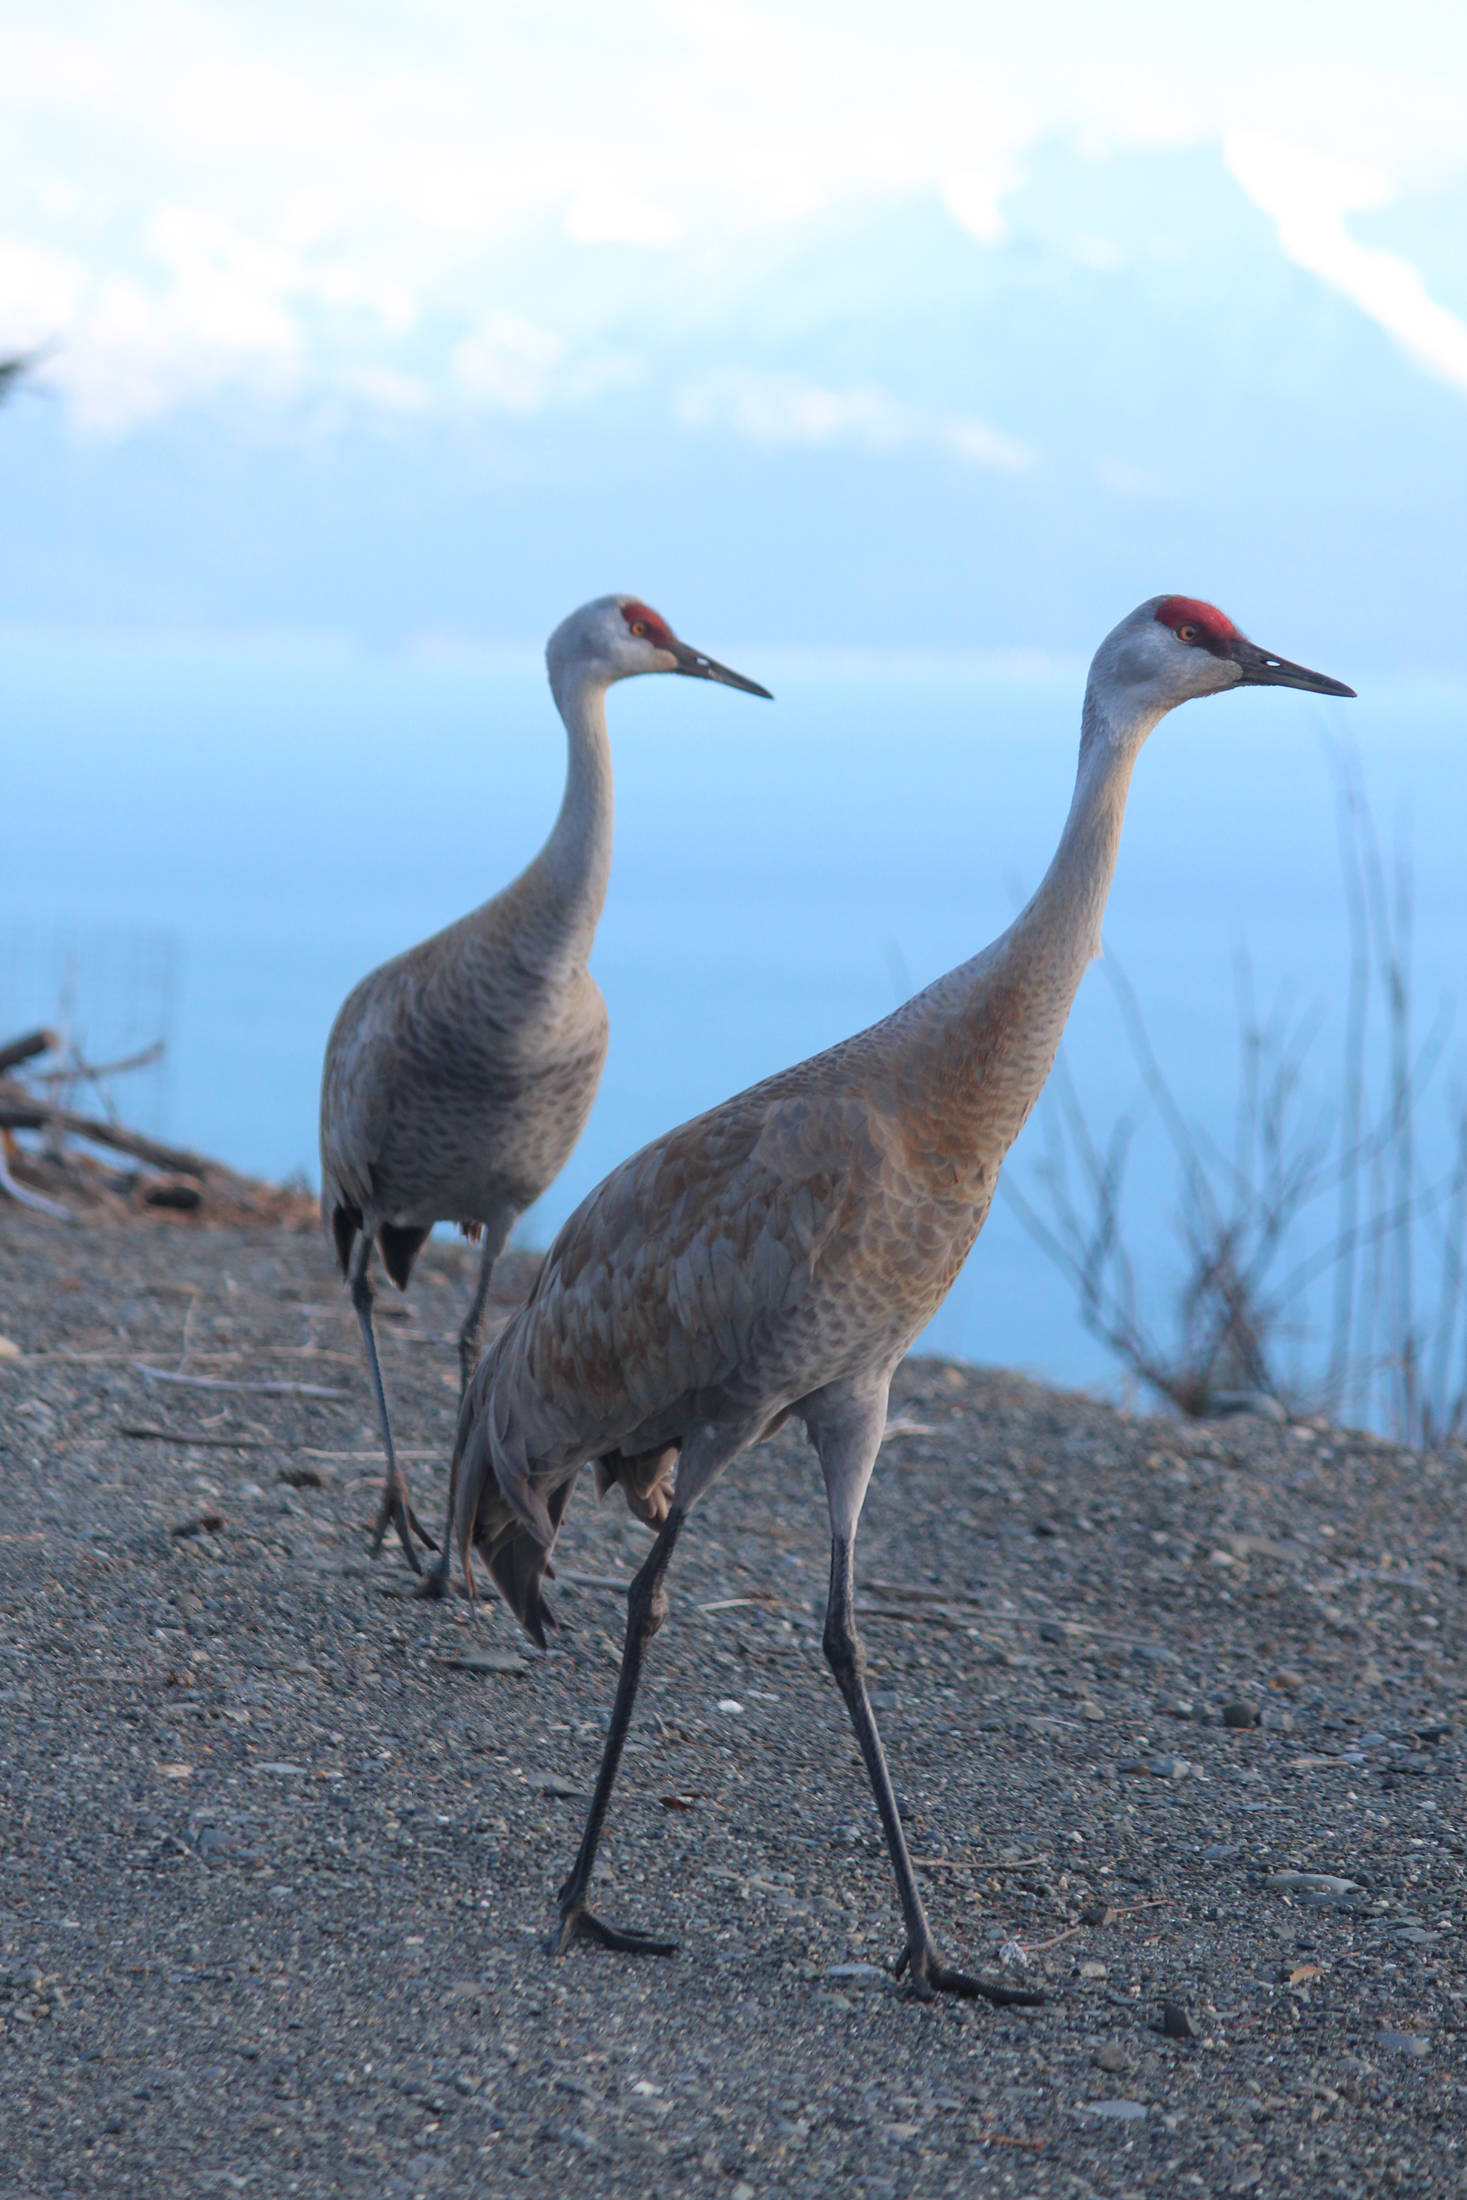 Two sandhill cranes walk across a yard on Crestwood Circle on Thursday, April 26, 2018 in Homer, Alaska. Report sandhill crane sightings to the Kachemak Crane Watch at 235-6262 or reports@cranewatch.org. Date, time, location, behavior, and number of cranes is helpful. Leave a name and number in case the group needs more details. (Photo by Megan Pacer/Homer News)